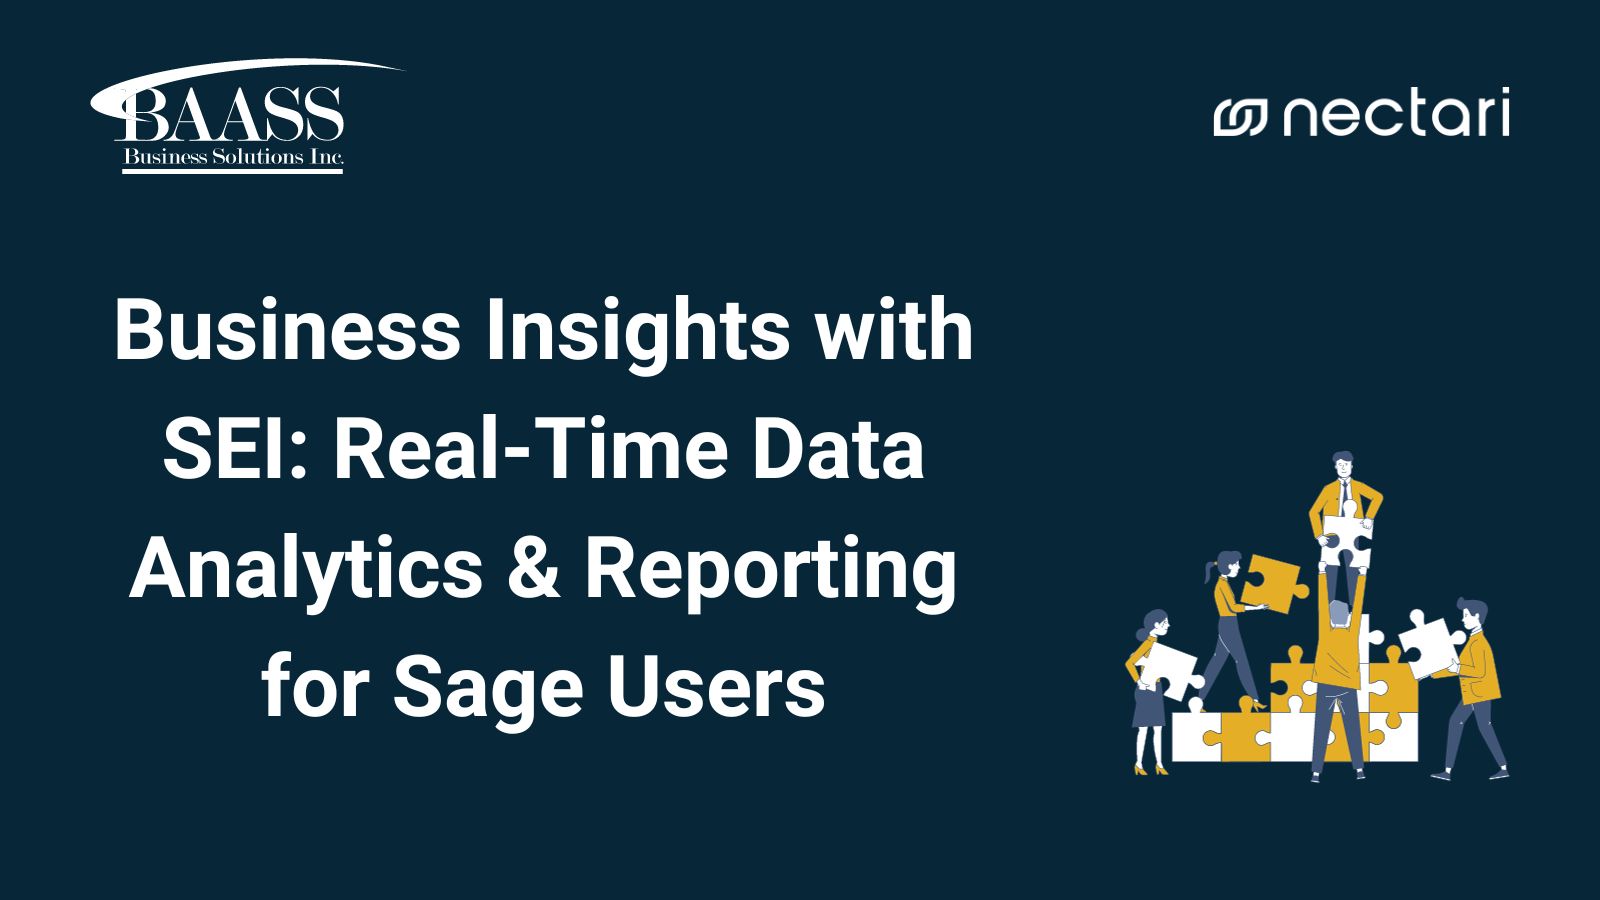 Business Insights with SEI: Real-Time Data Analytics & Reporting for Sage Users